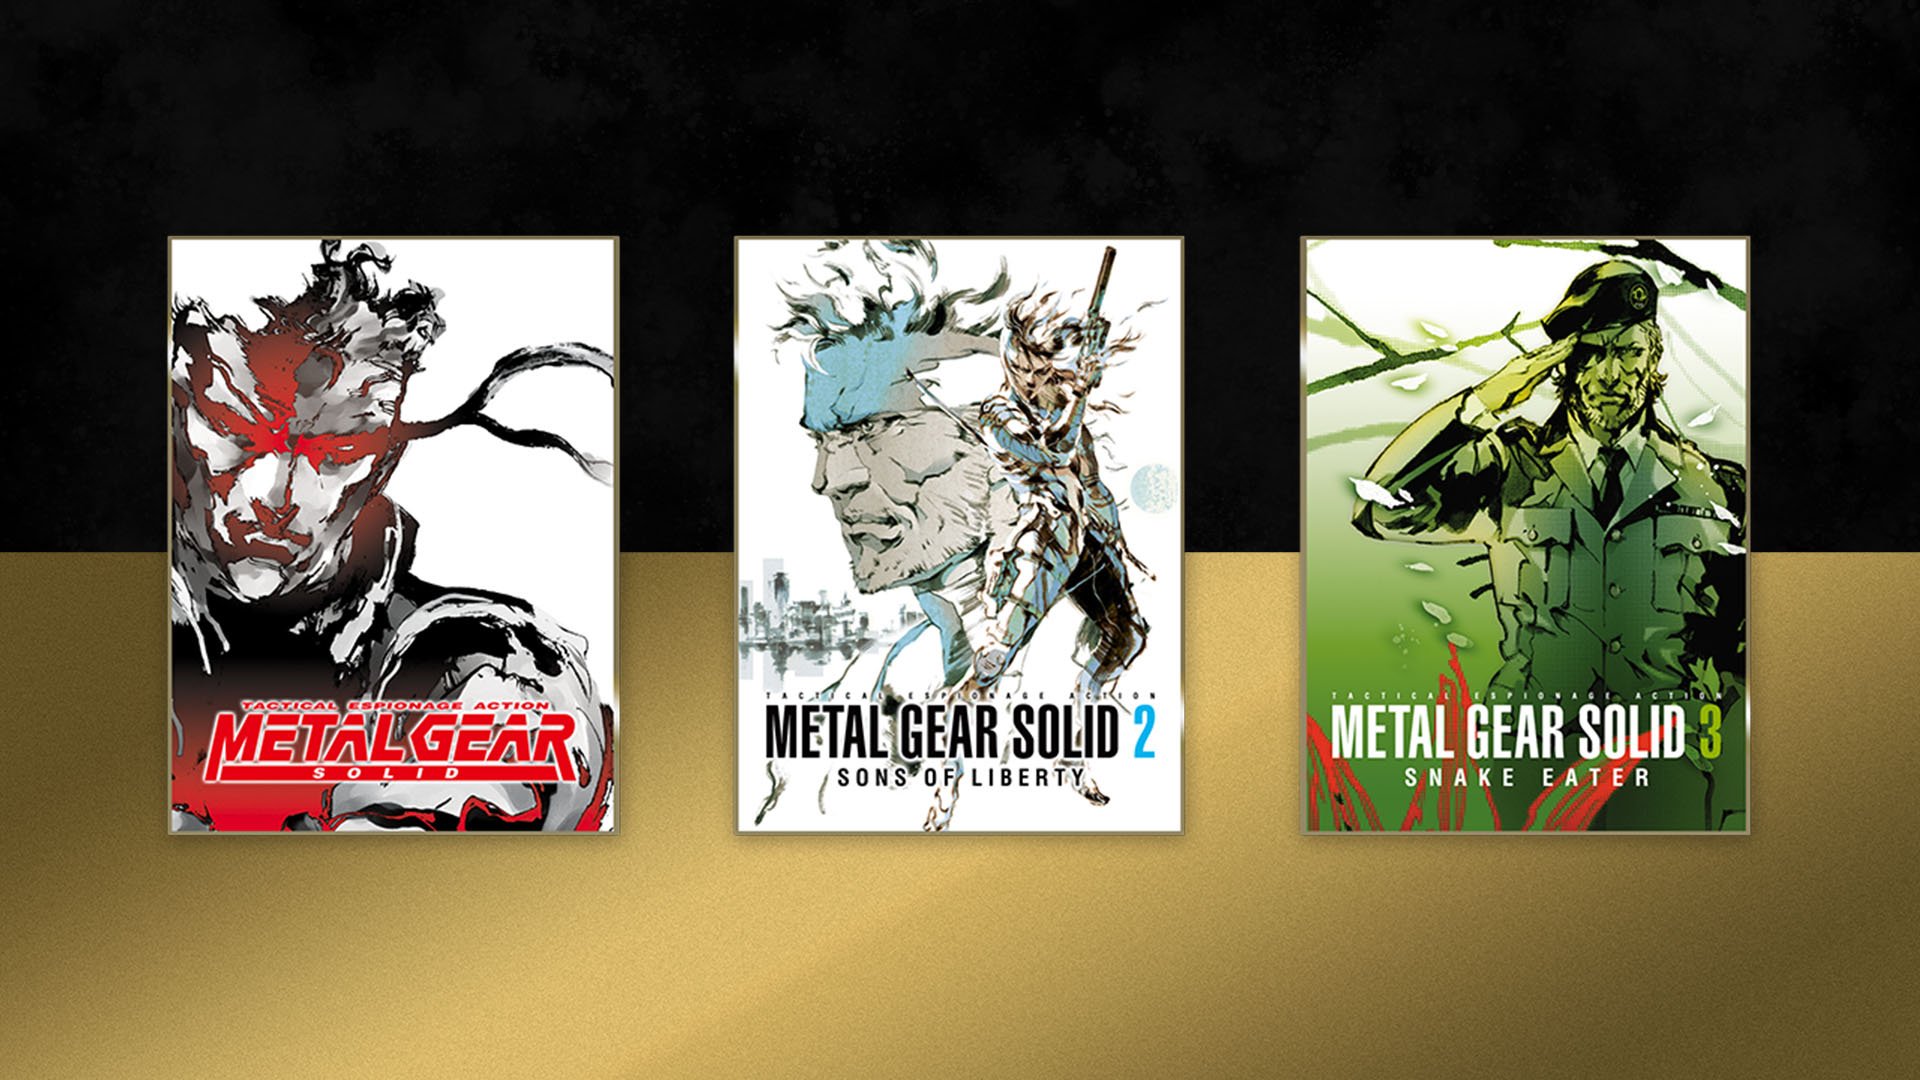 Metal Gear Solid: Master Collection Vol 1 Is Available Now